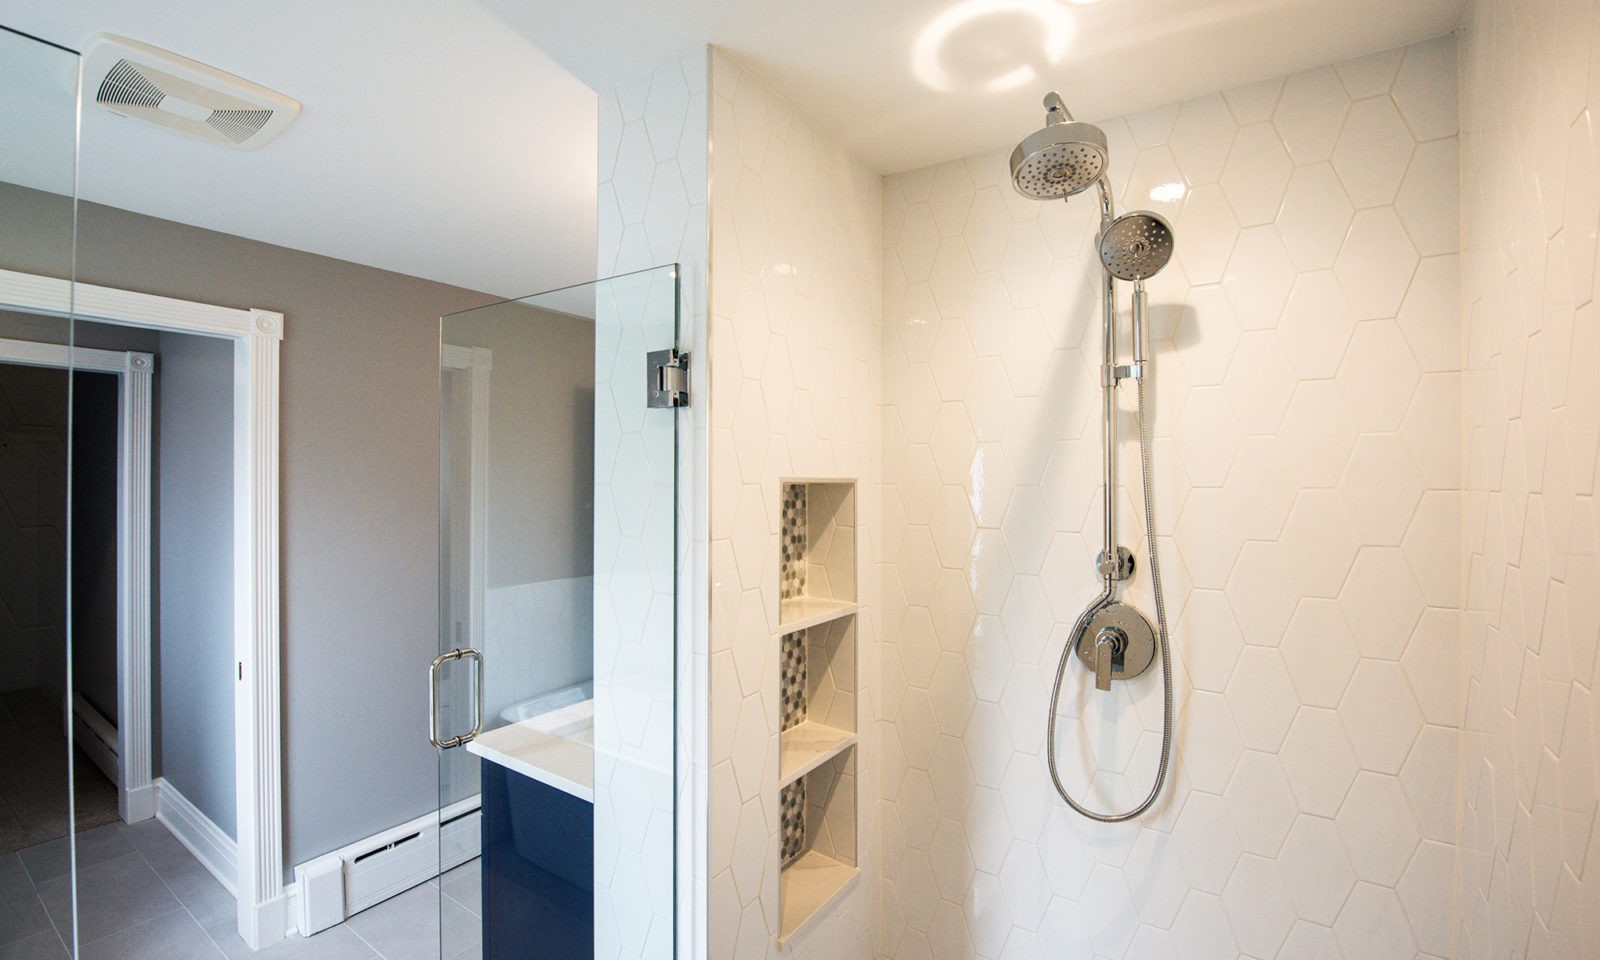 Newly renovated standing shower with white hexagonal tiles on the walls and silver fixtures